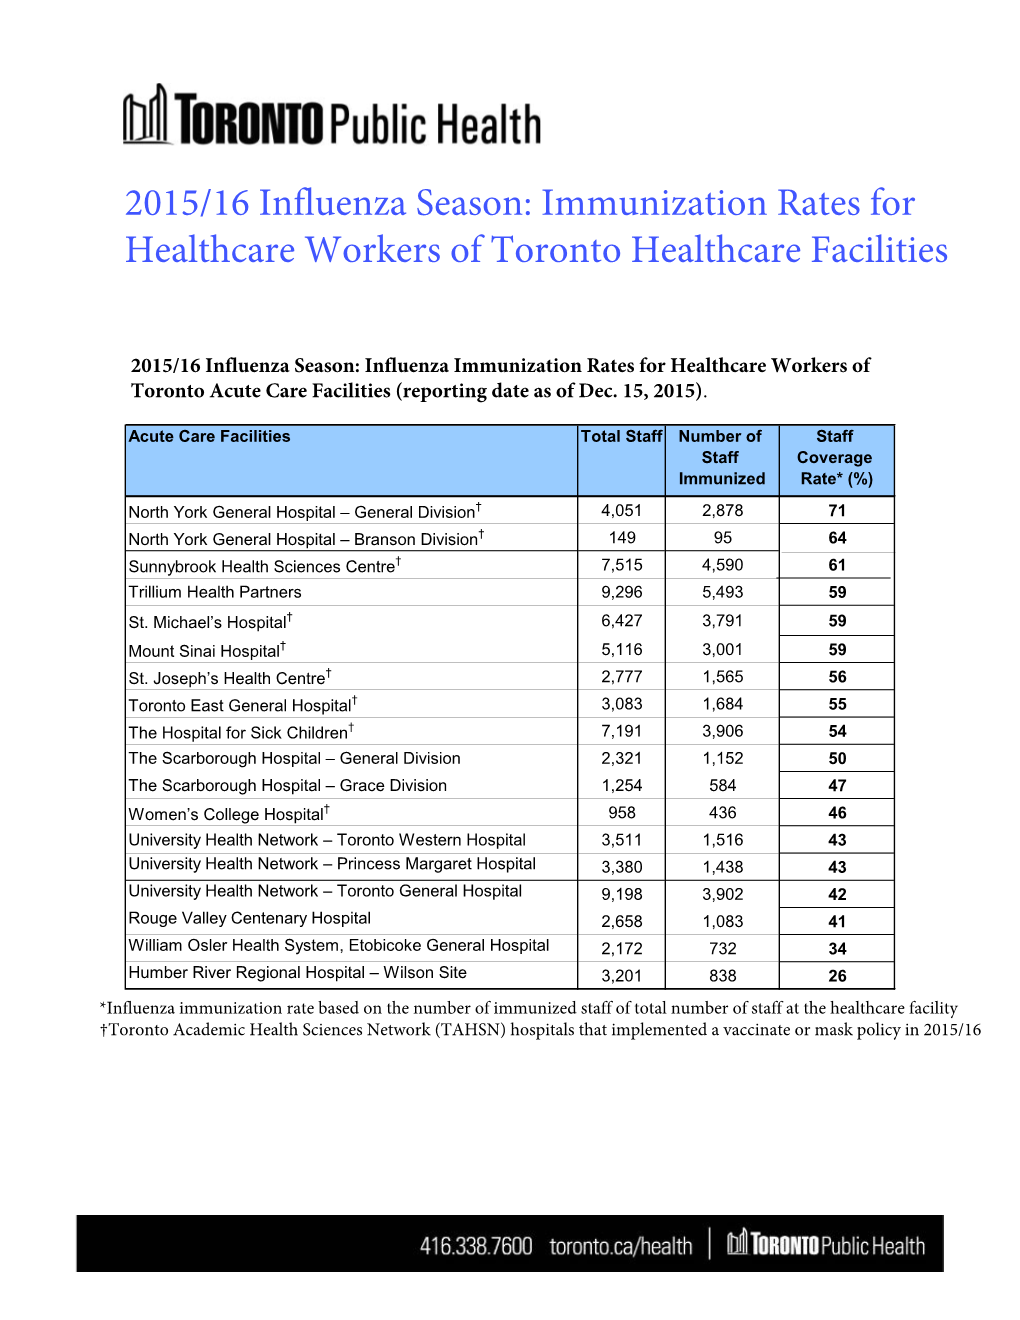 Immunization Rates for Healthcare Workers of Toronto Healthcare Facilities